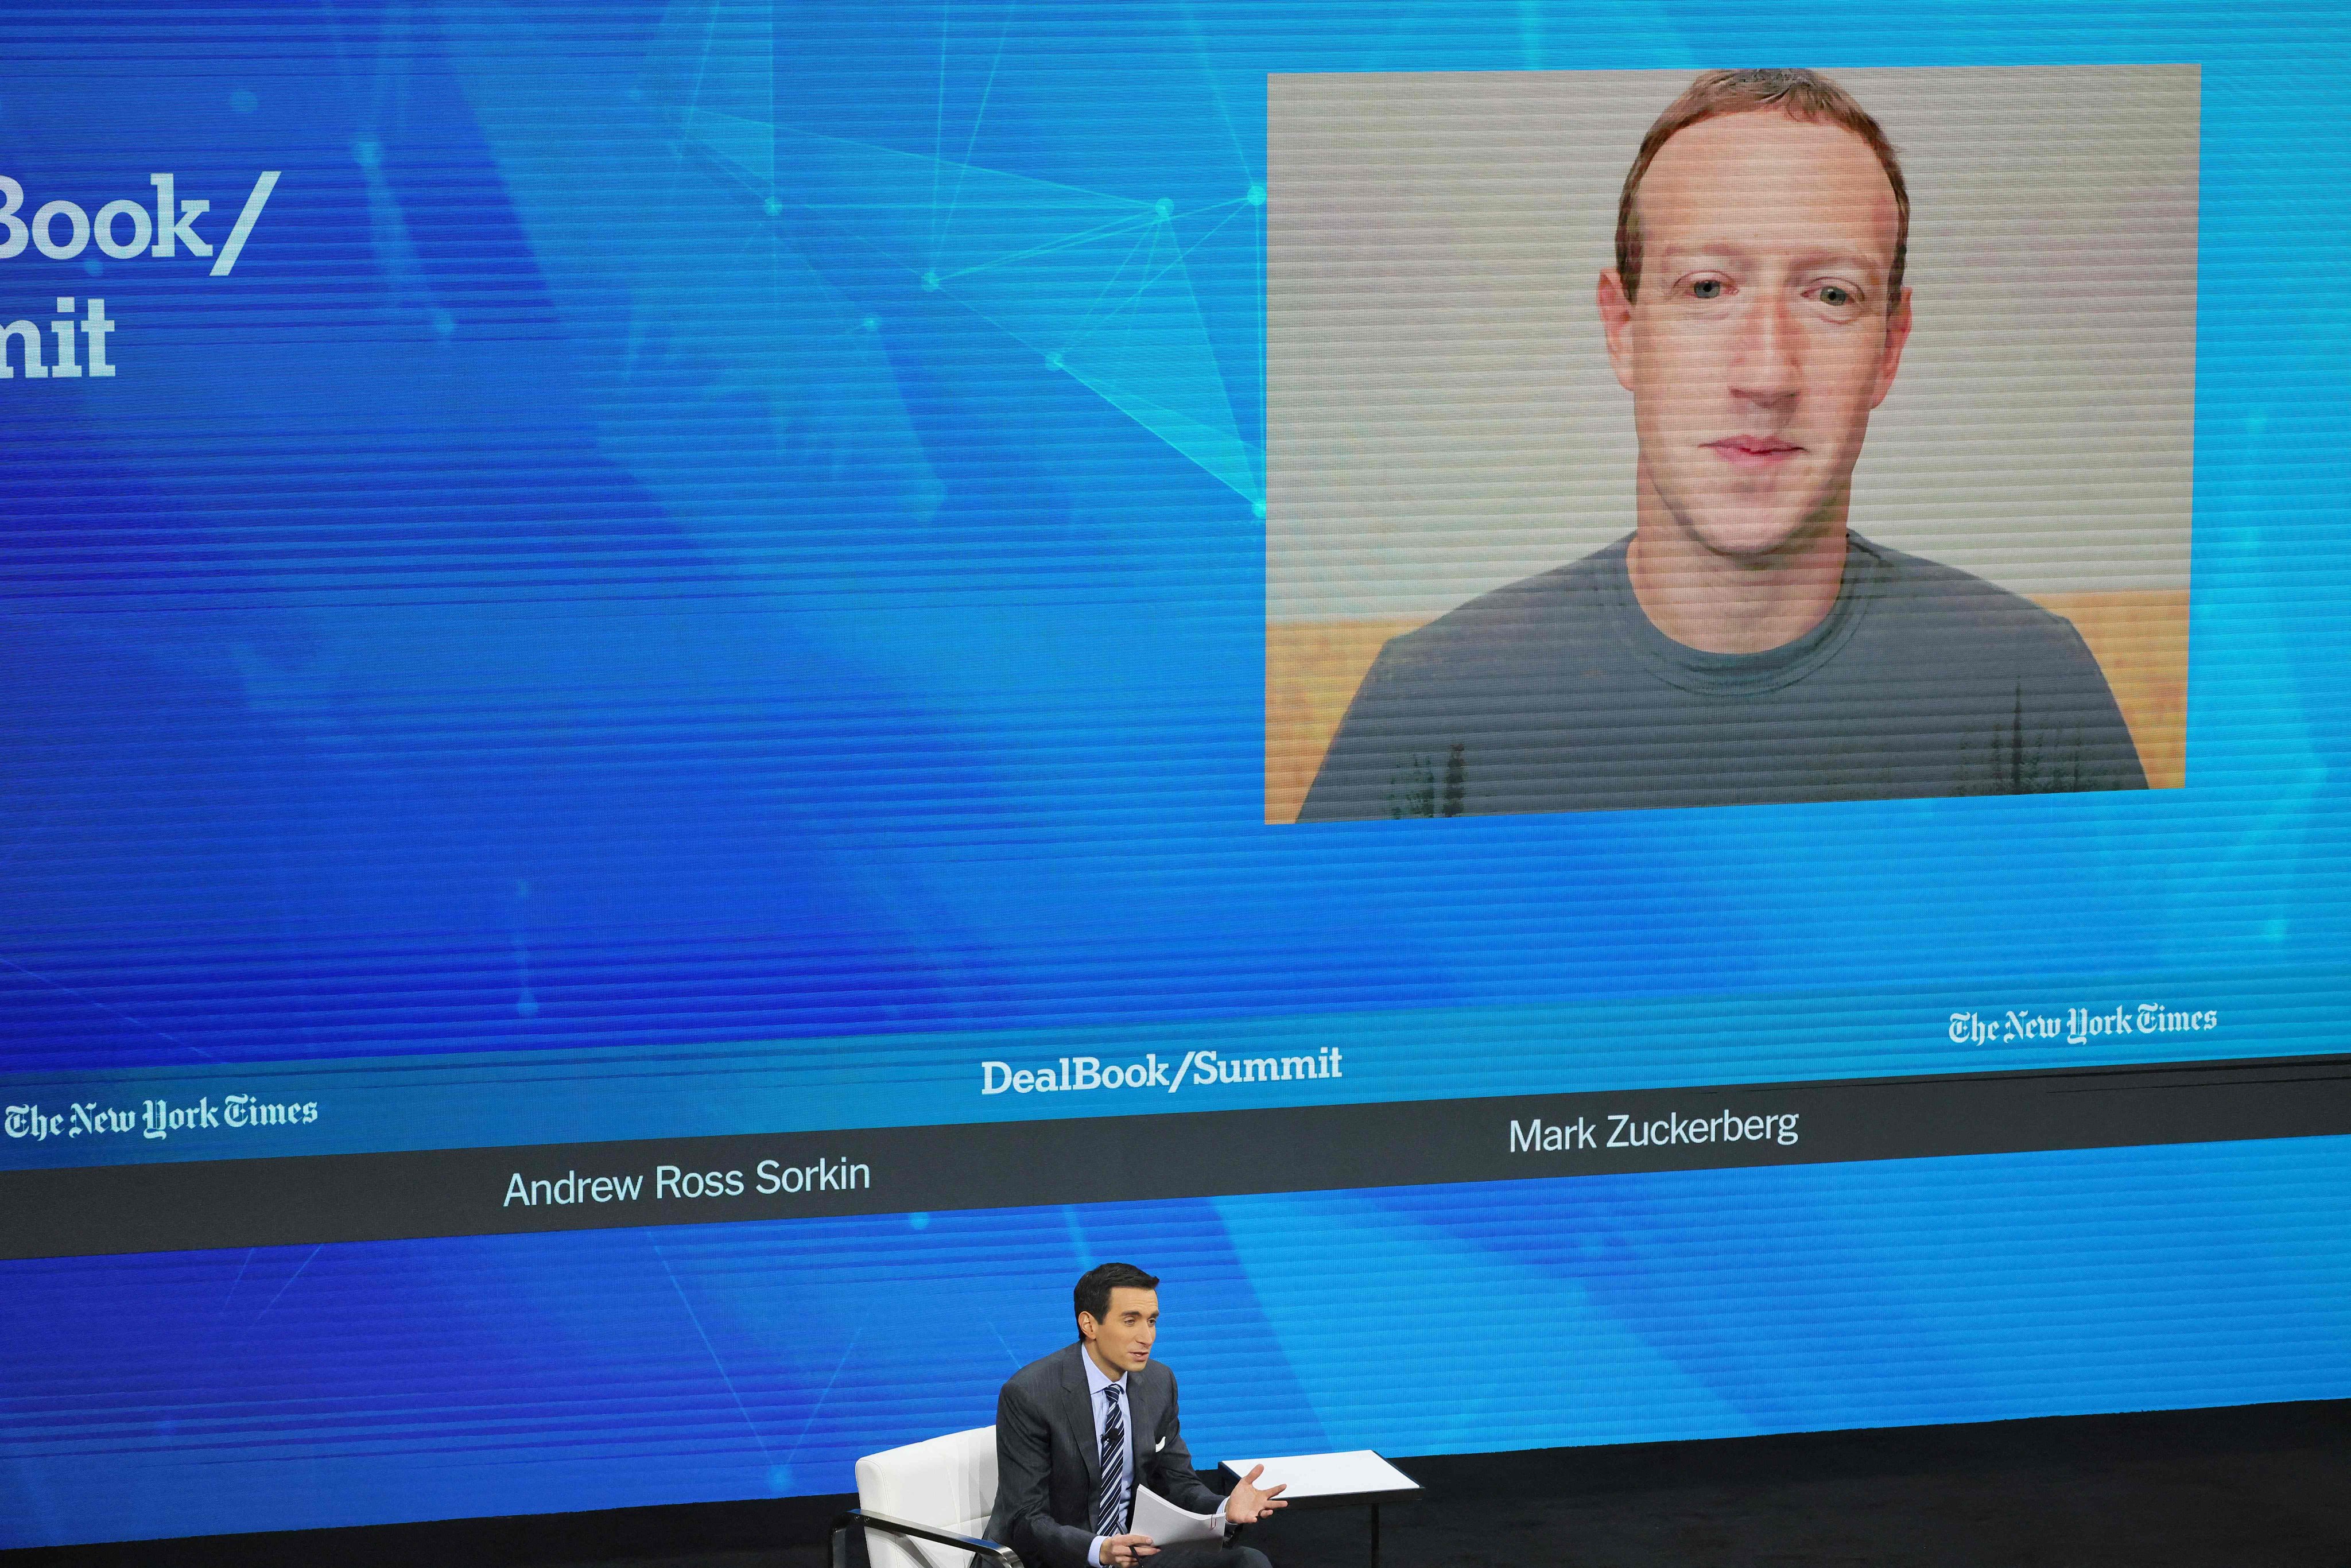 Andrew Ross Sorkin speaks with Meta CEO and founder Mark Zuckerberg during The New York Times DealBook Summit in the Appel Room at the Jazz At Lincoln Center on November 30, 2022 in New York City. Photo: AFP